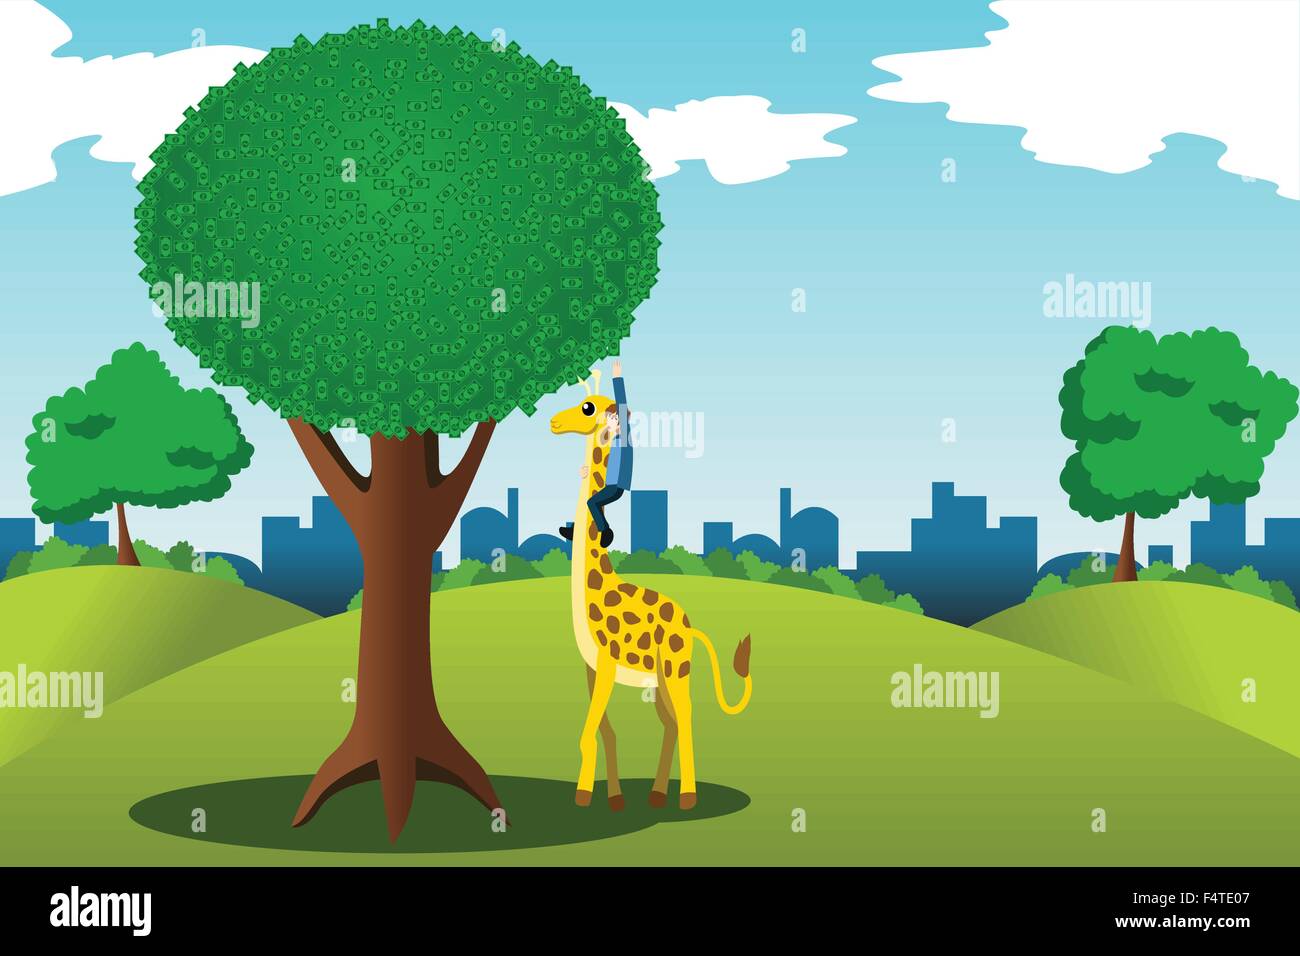 A vector illustration of man trying to reach money on a tall money tree while riding on a giraffe Stock Vector